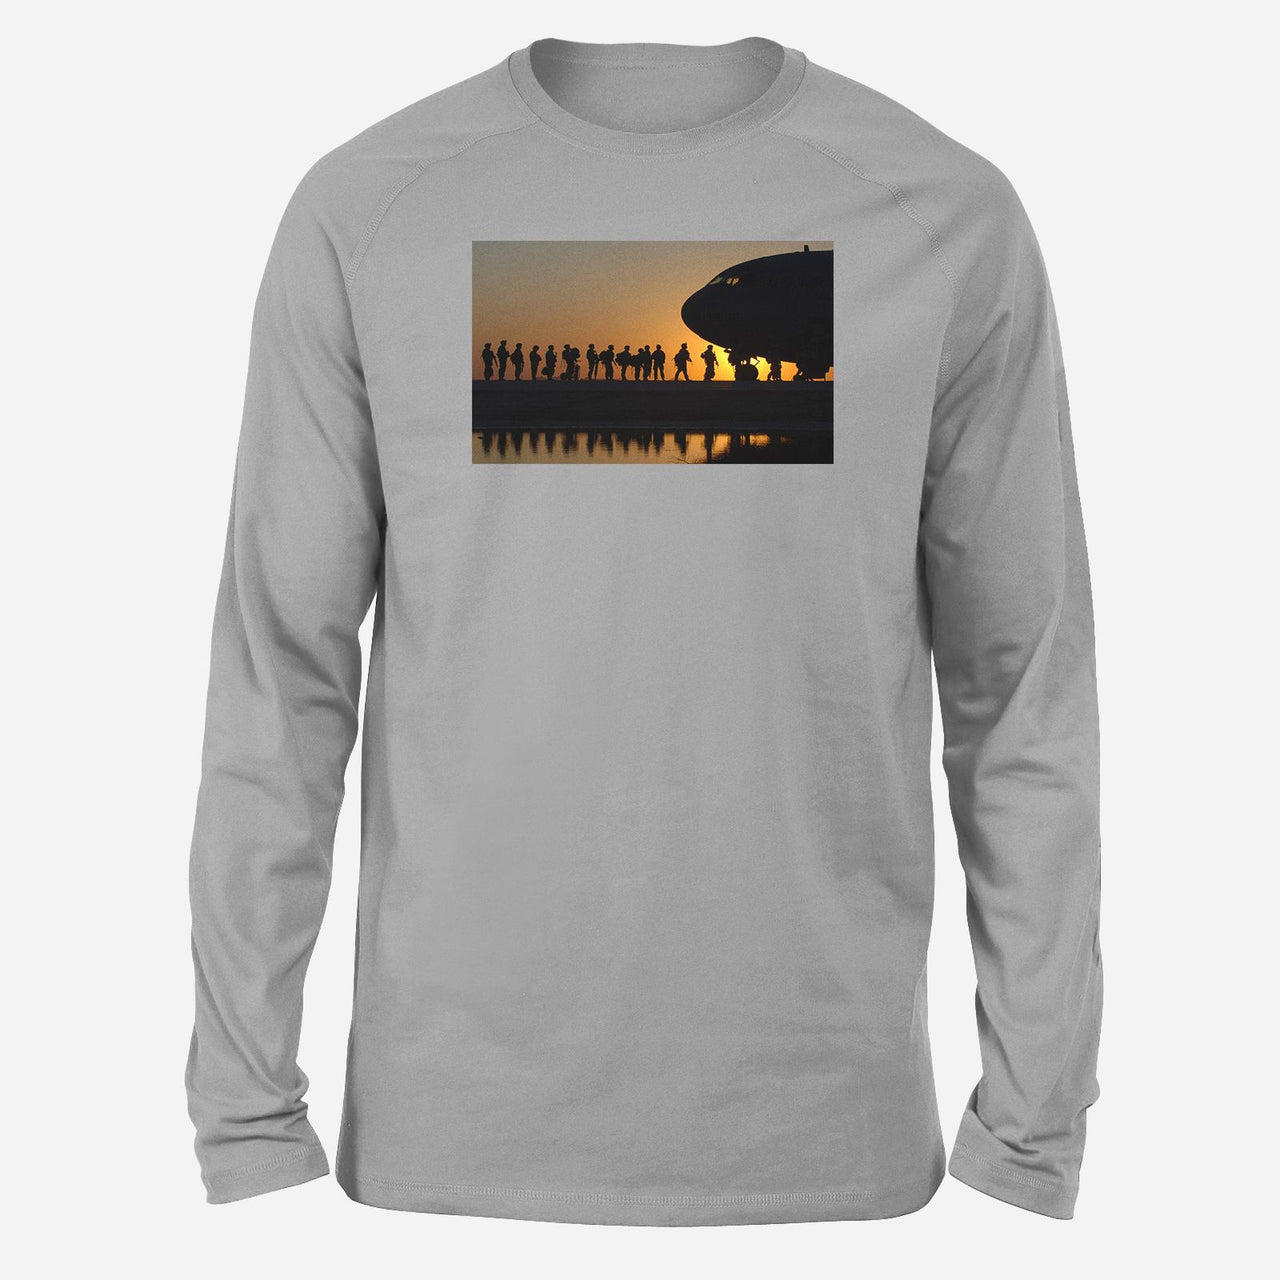 Band of Brothers Theme Soldiers Designed Long-Sleeve T-Shirts